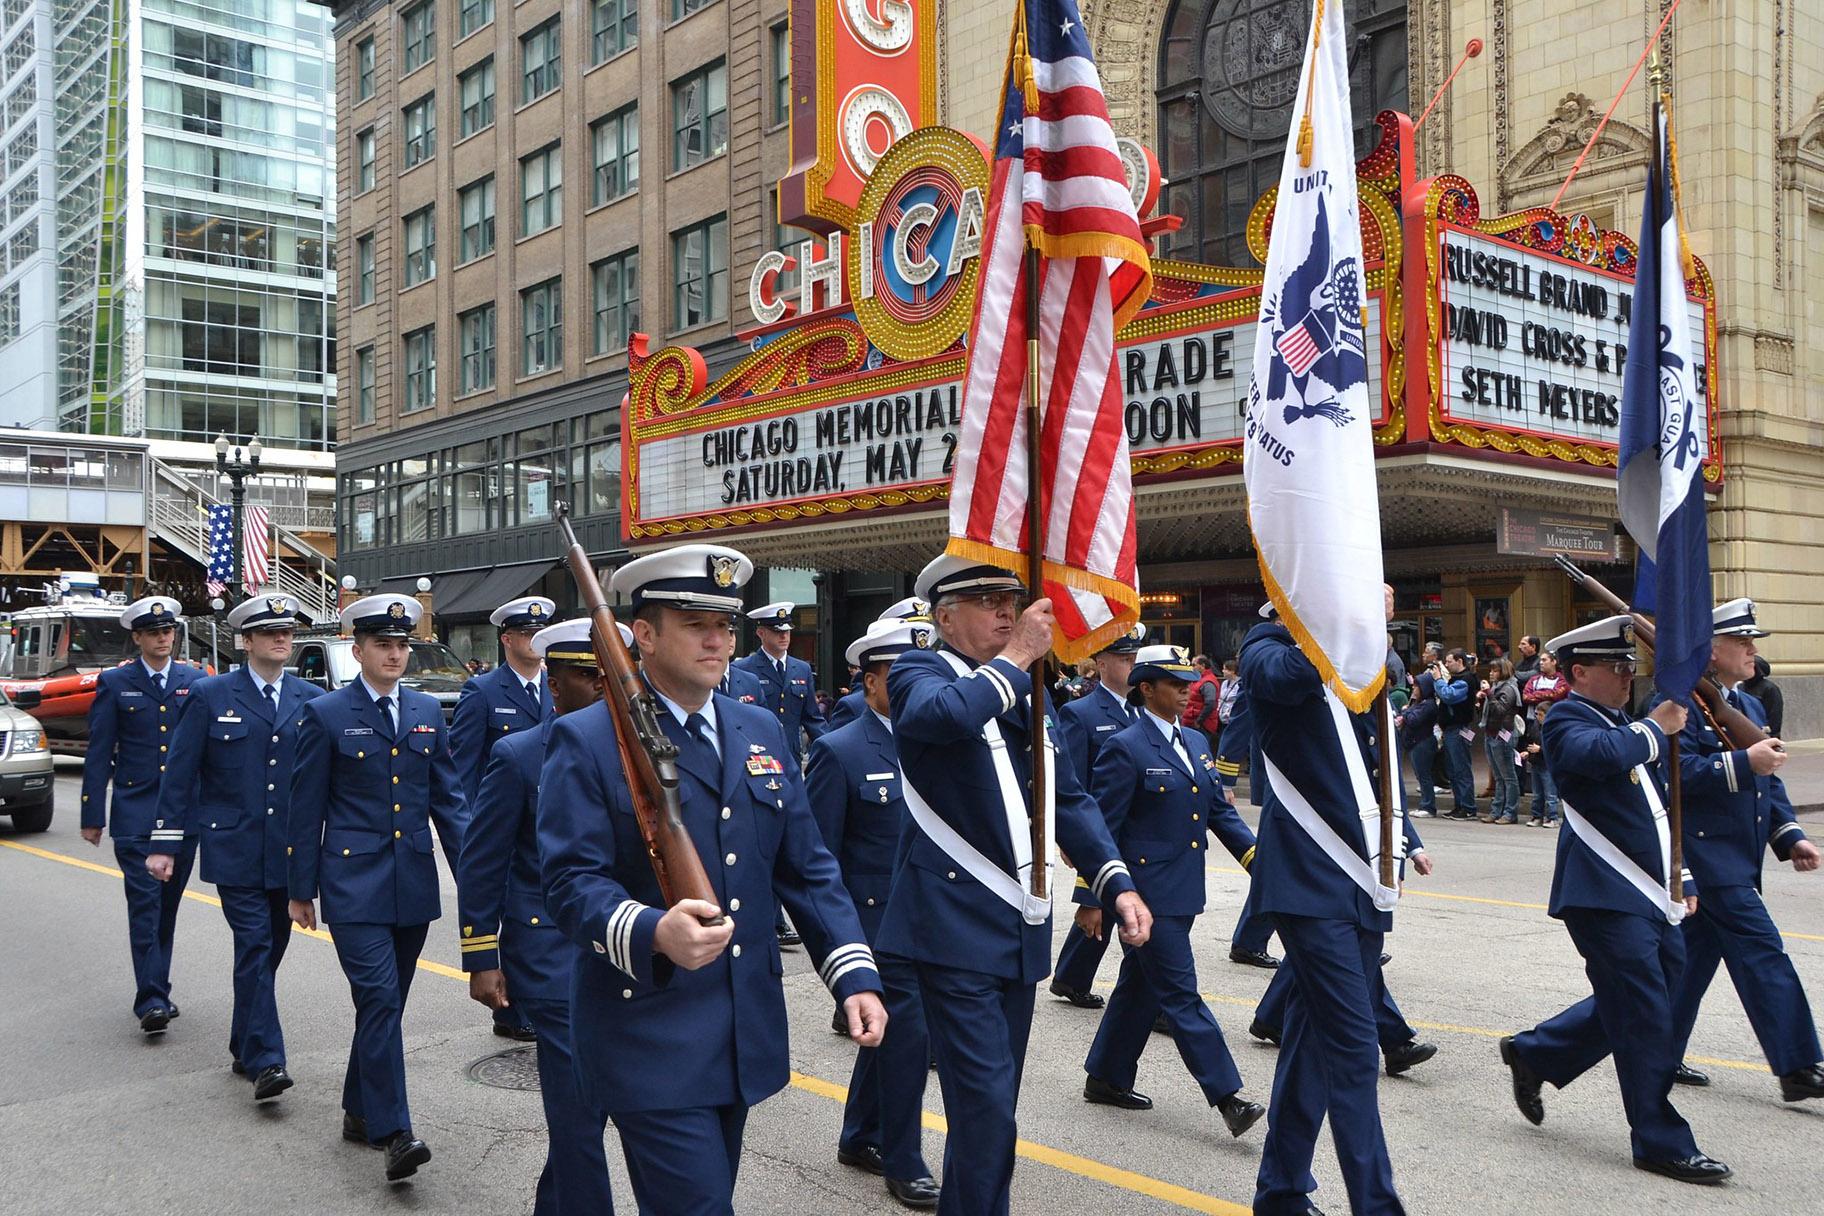 Members of the Coast Guard and Coast Guard Auxiliary march along State Street during the Chicago Memorial Day Parade on May 25, 2013. (Coast Guard News / Flickr)